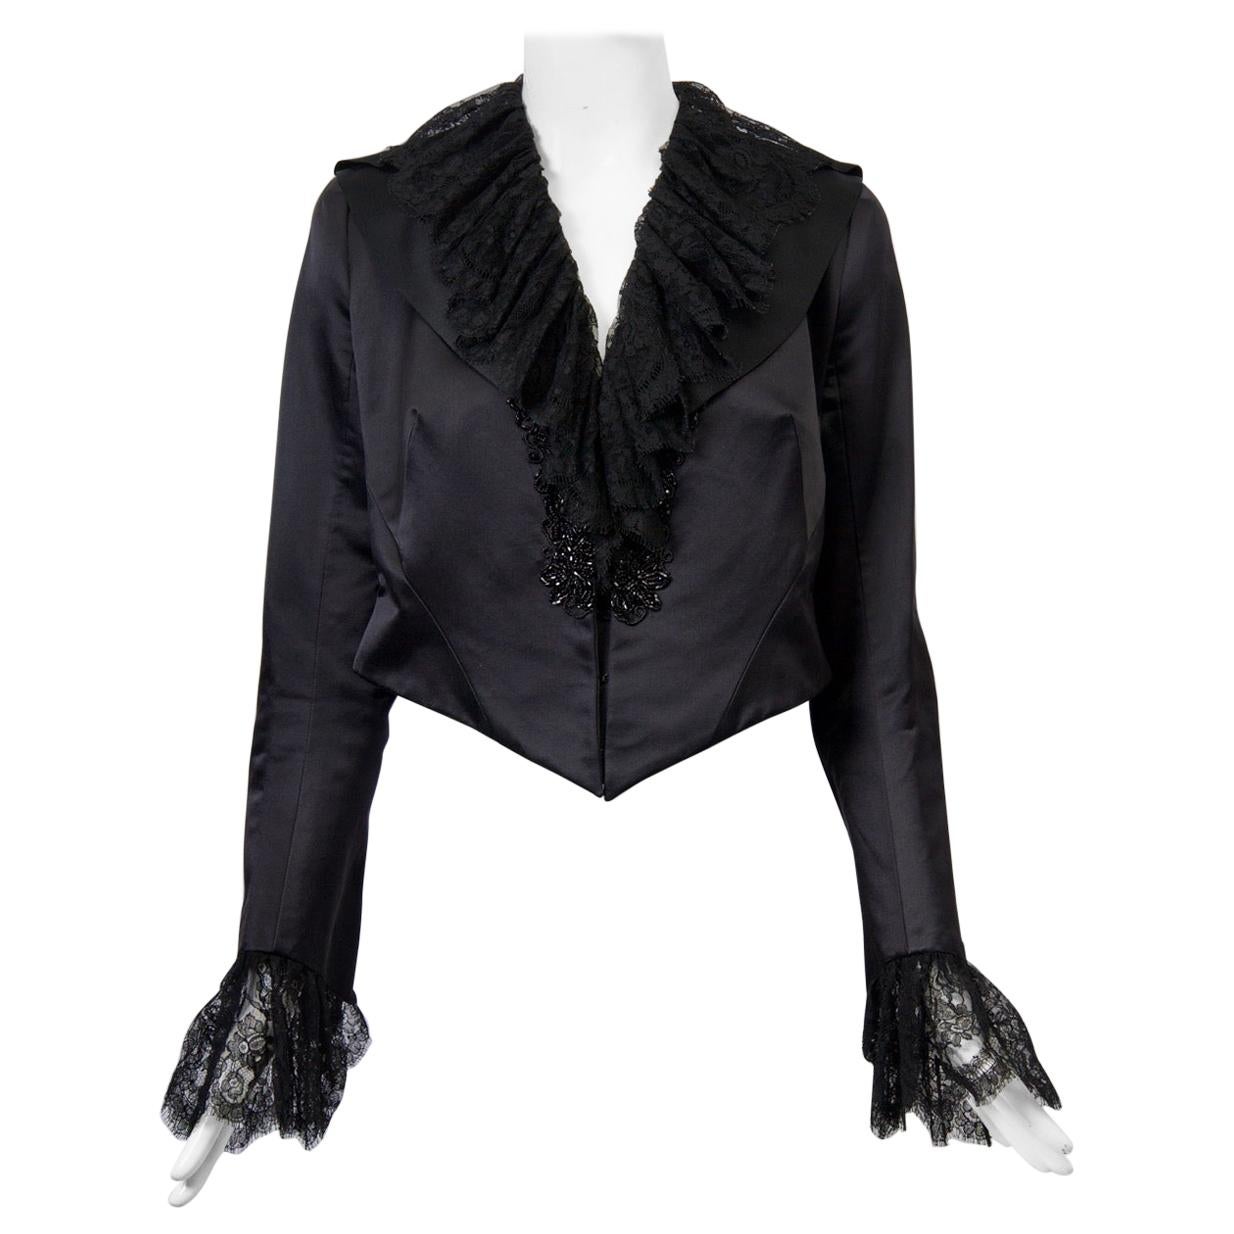 Maggie Norris Couture Black Satin Jacket with Beading and Lace